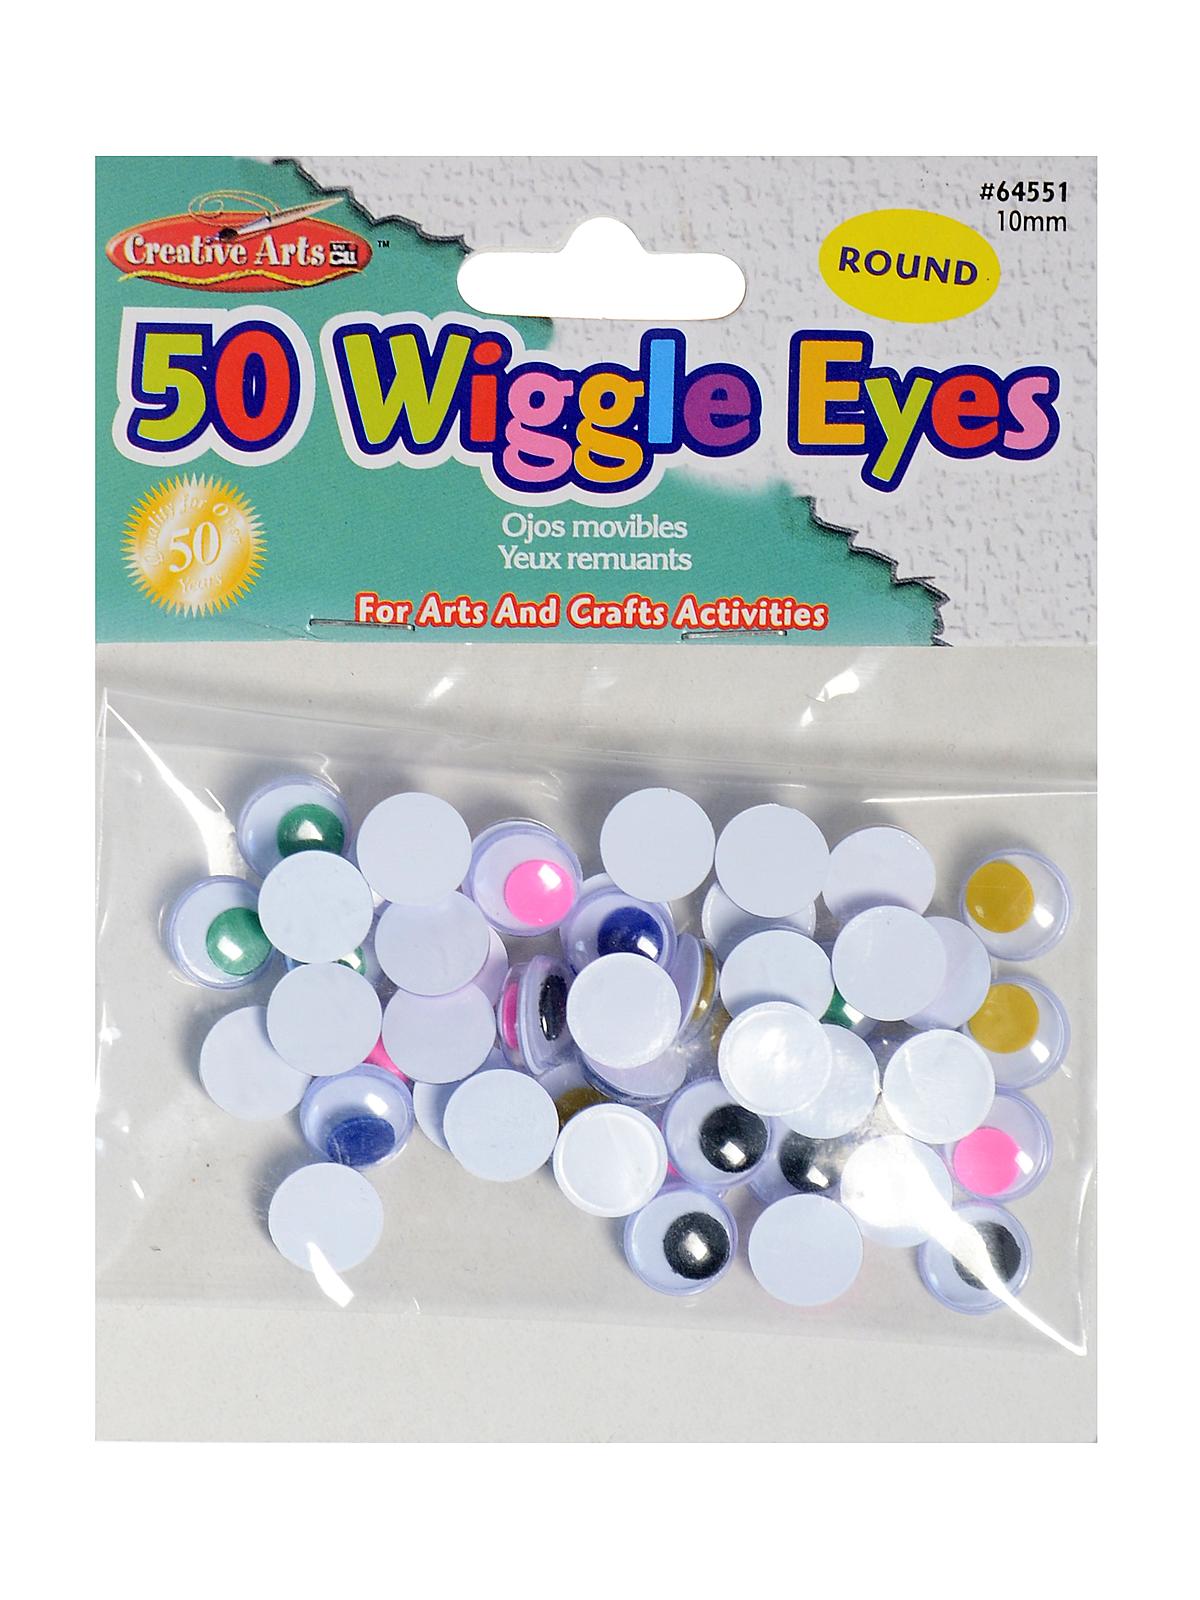 Wiggle Eyes 50 Pieces; Round Assorted 10 Mm